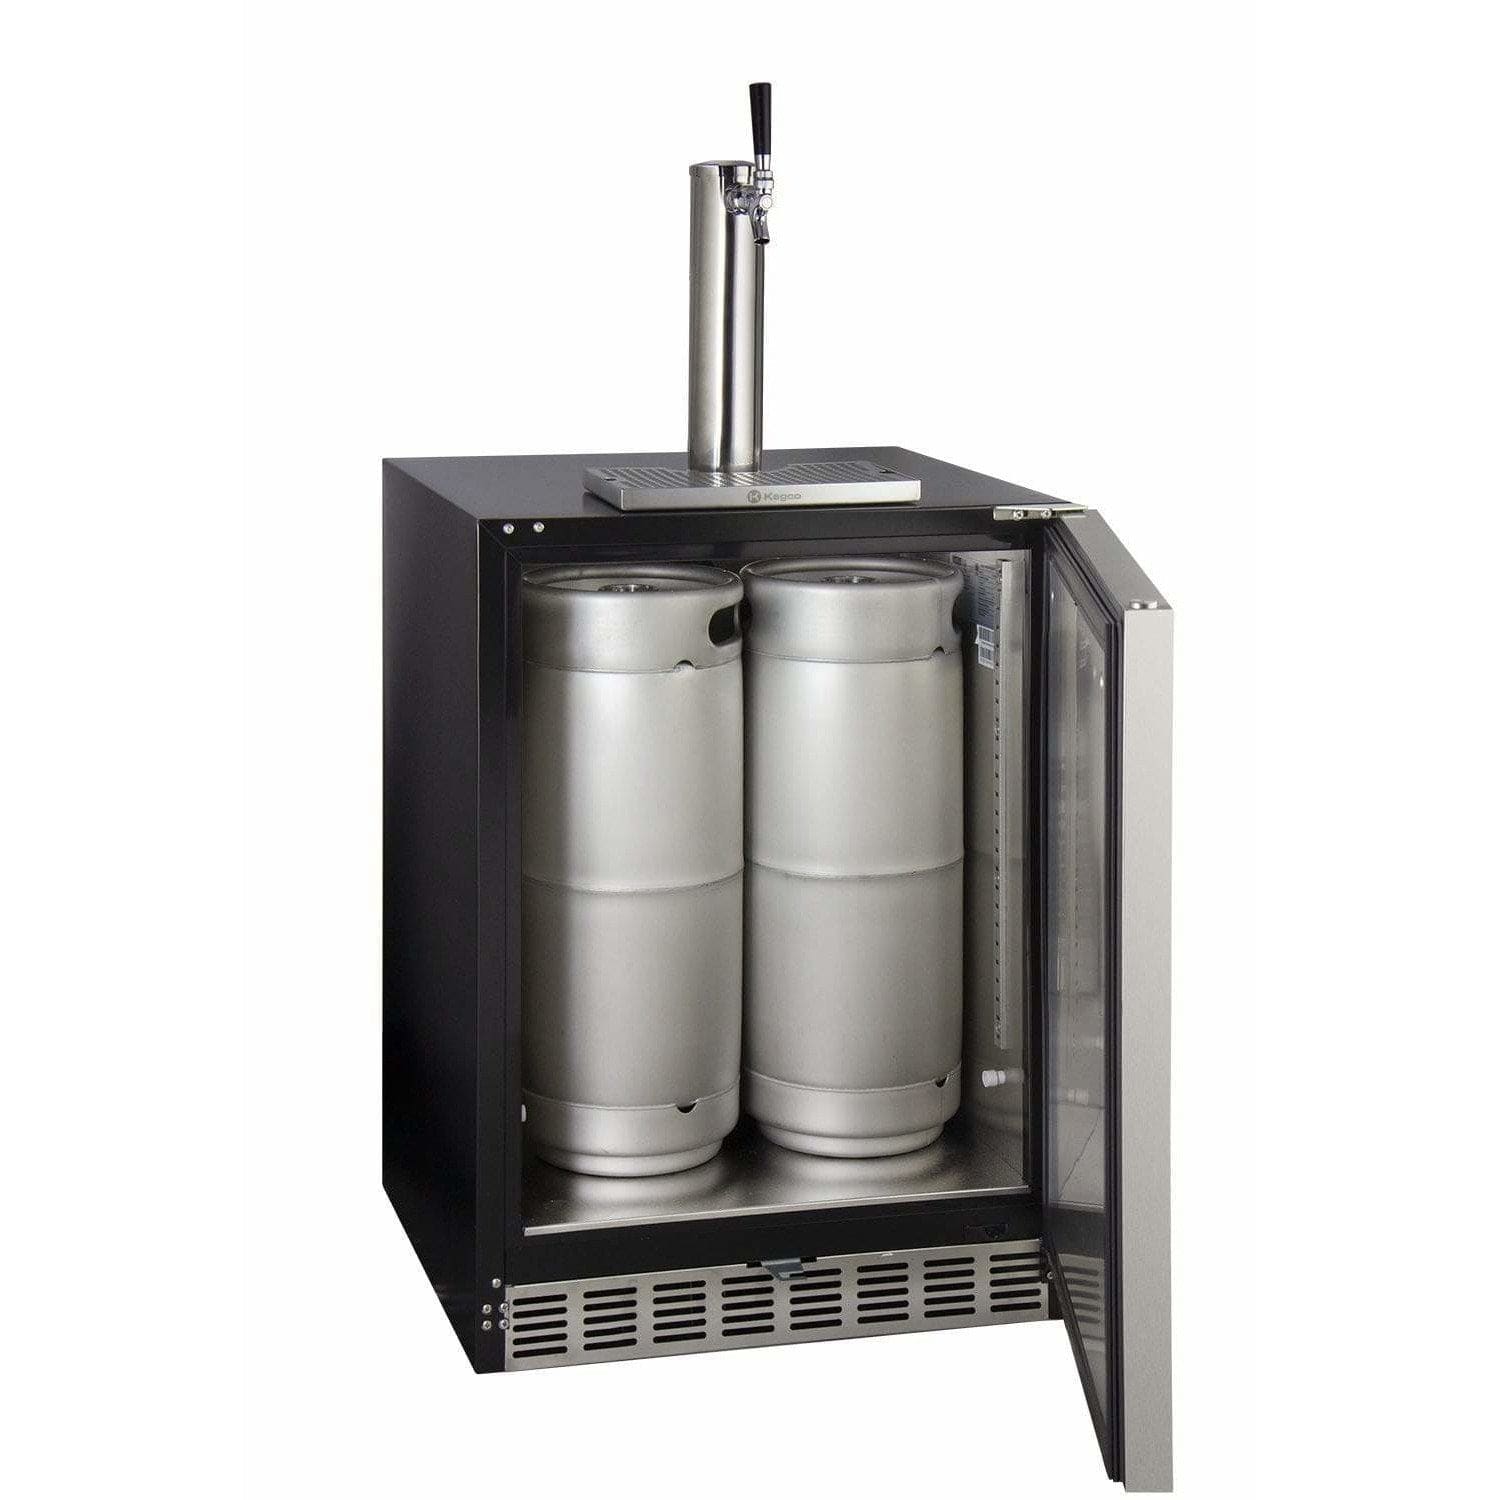 Kegco 24" Wide Single Tap Stainless Steel Built-In Right Hinge ADA  with Kit Kegerator HK48BSA-1 Wine Coolers Empire